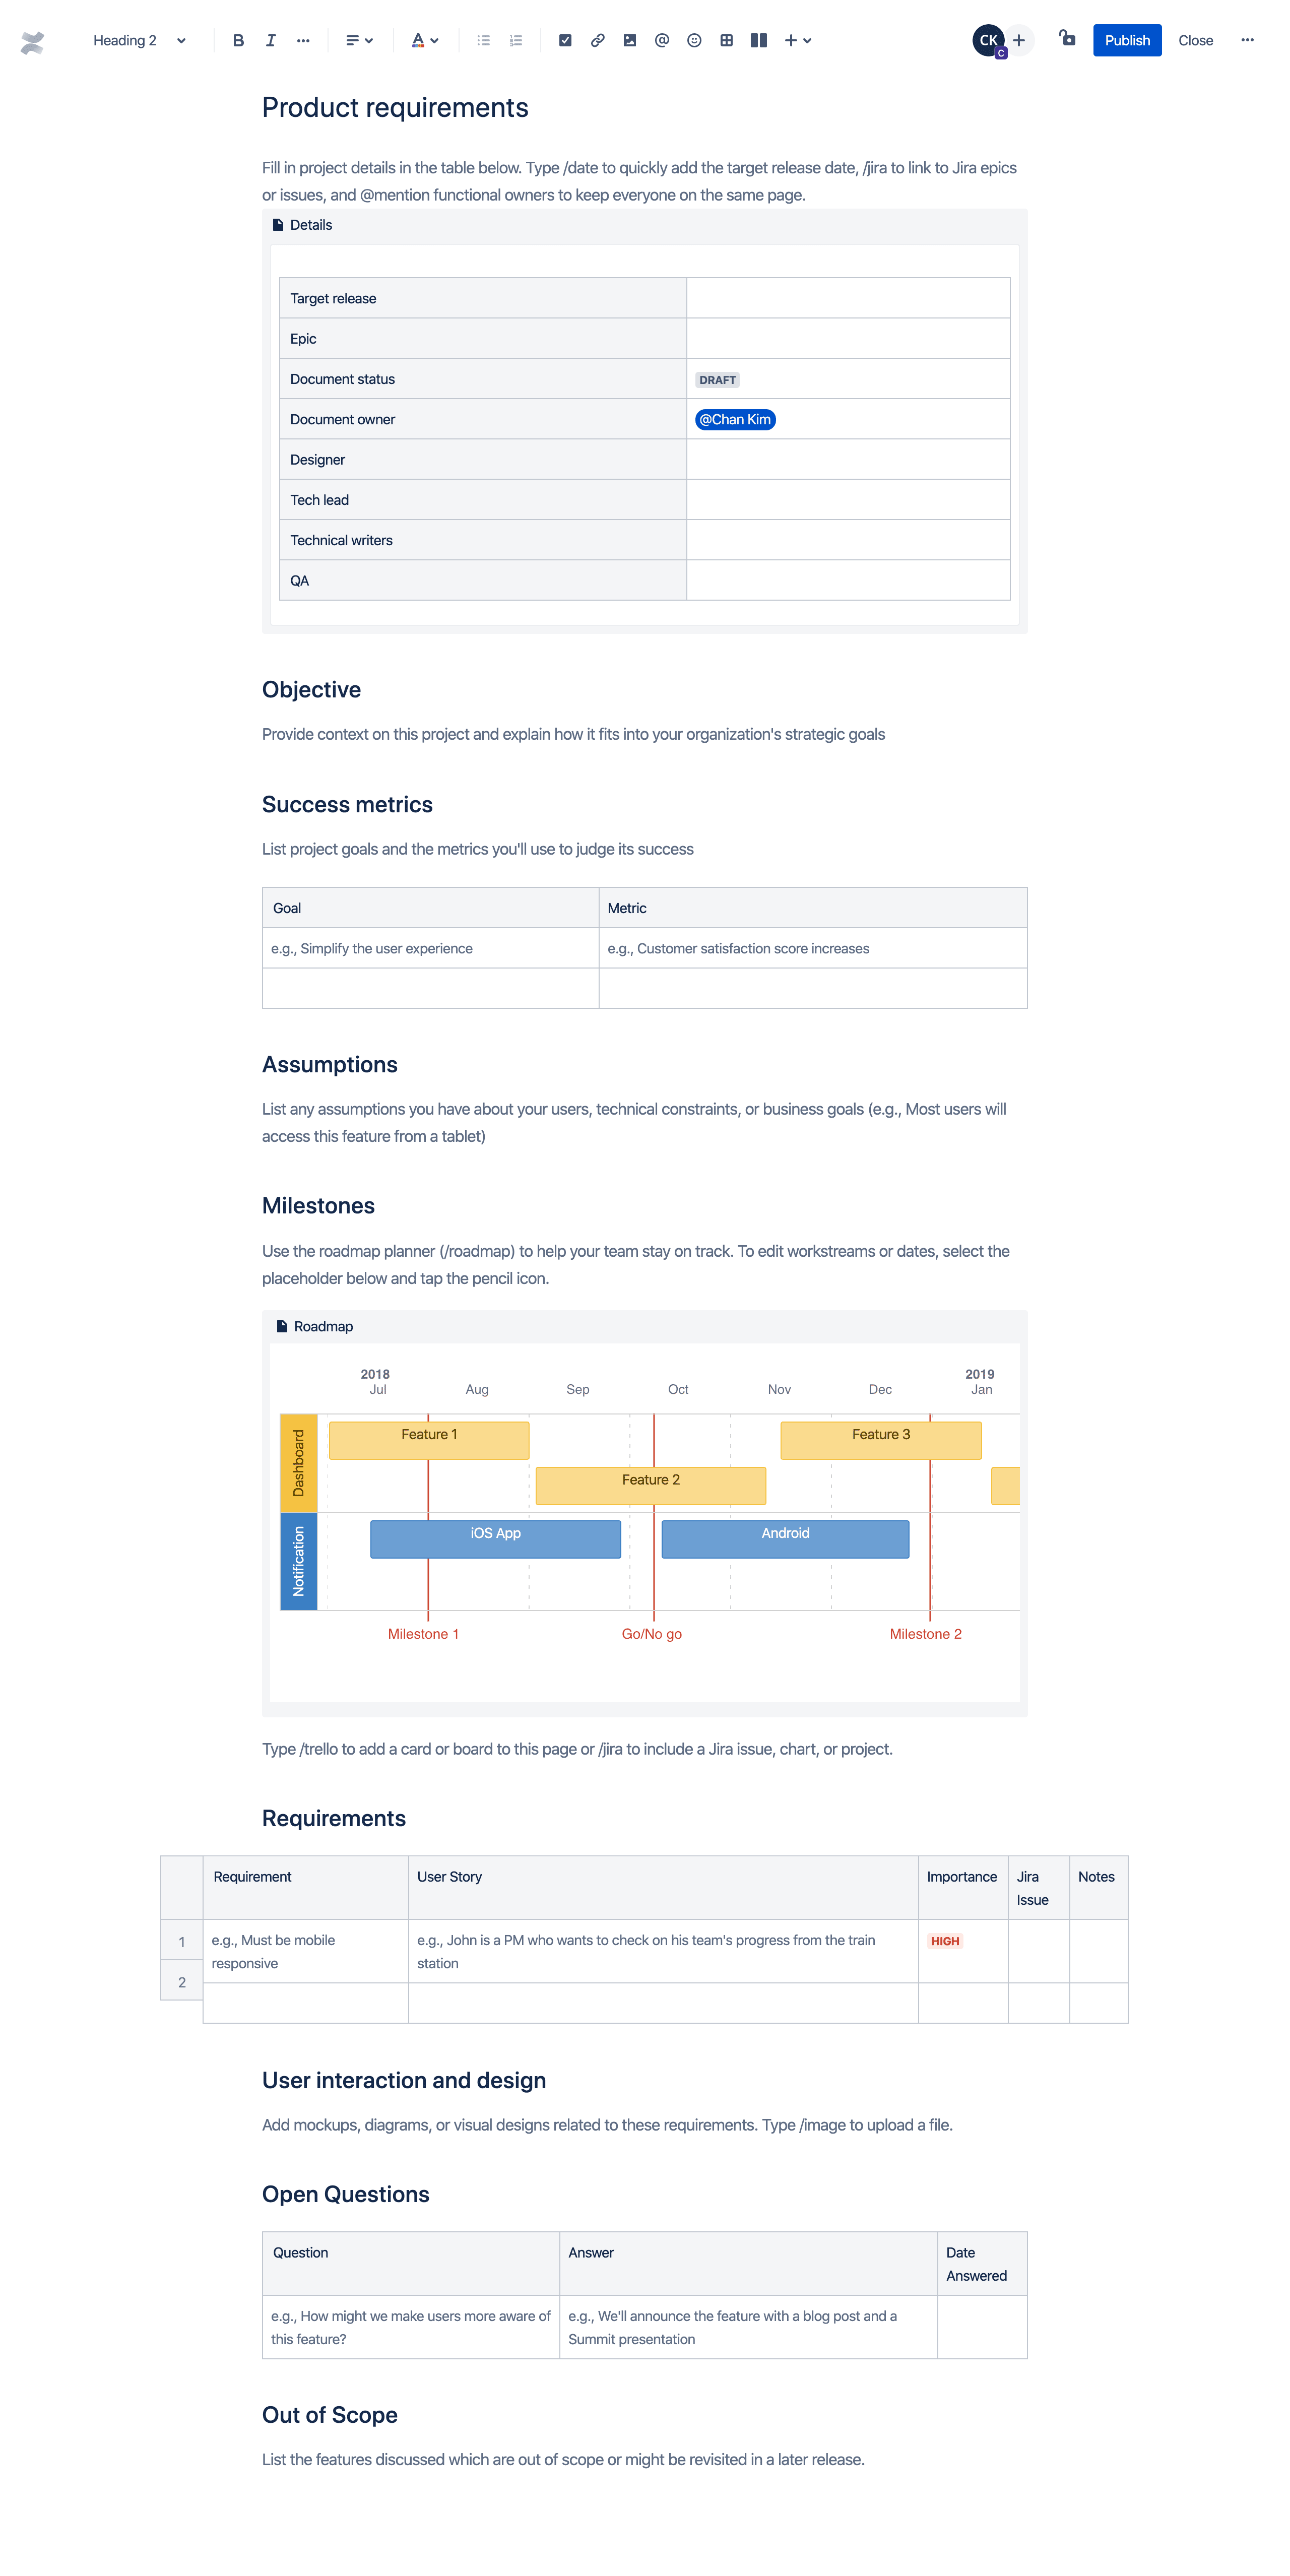 Confluence's template for product requirements